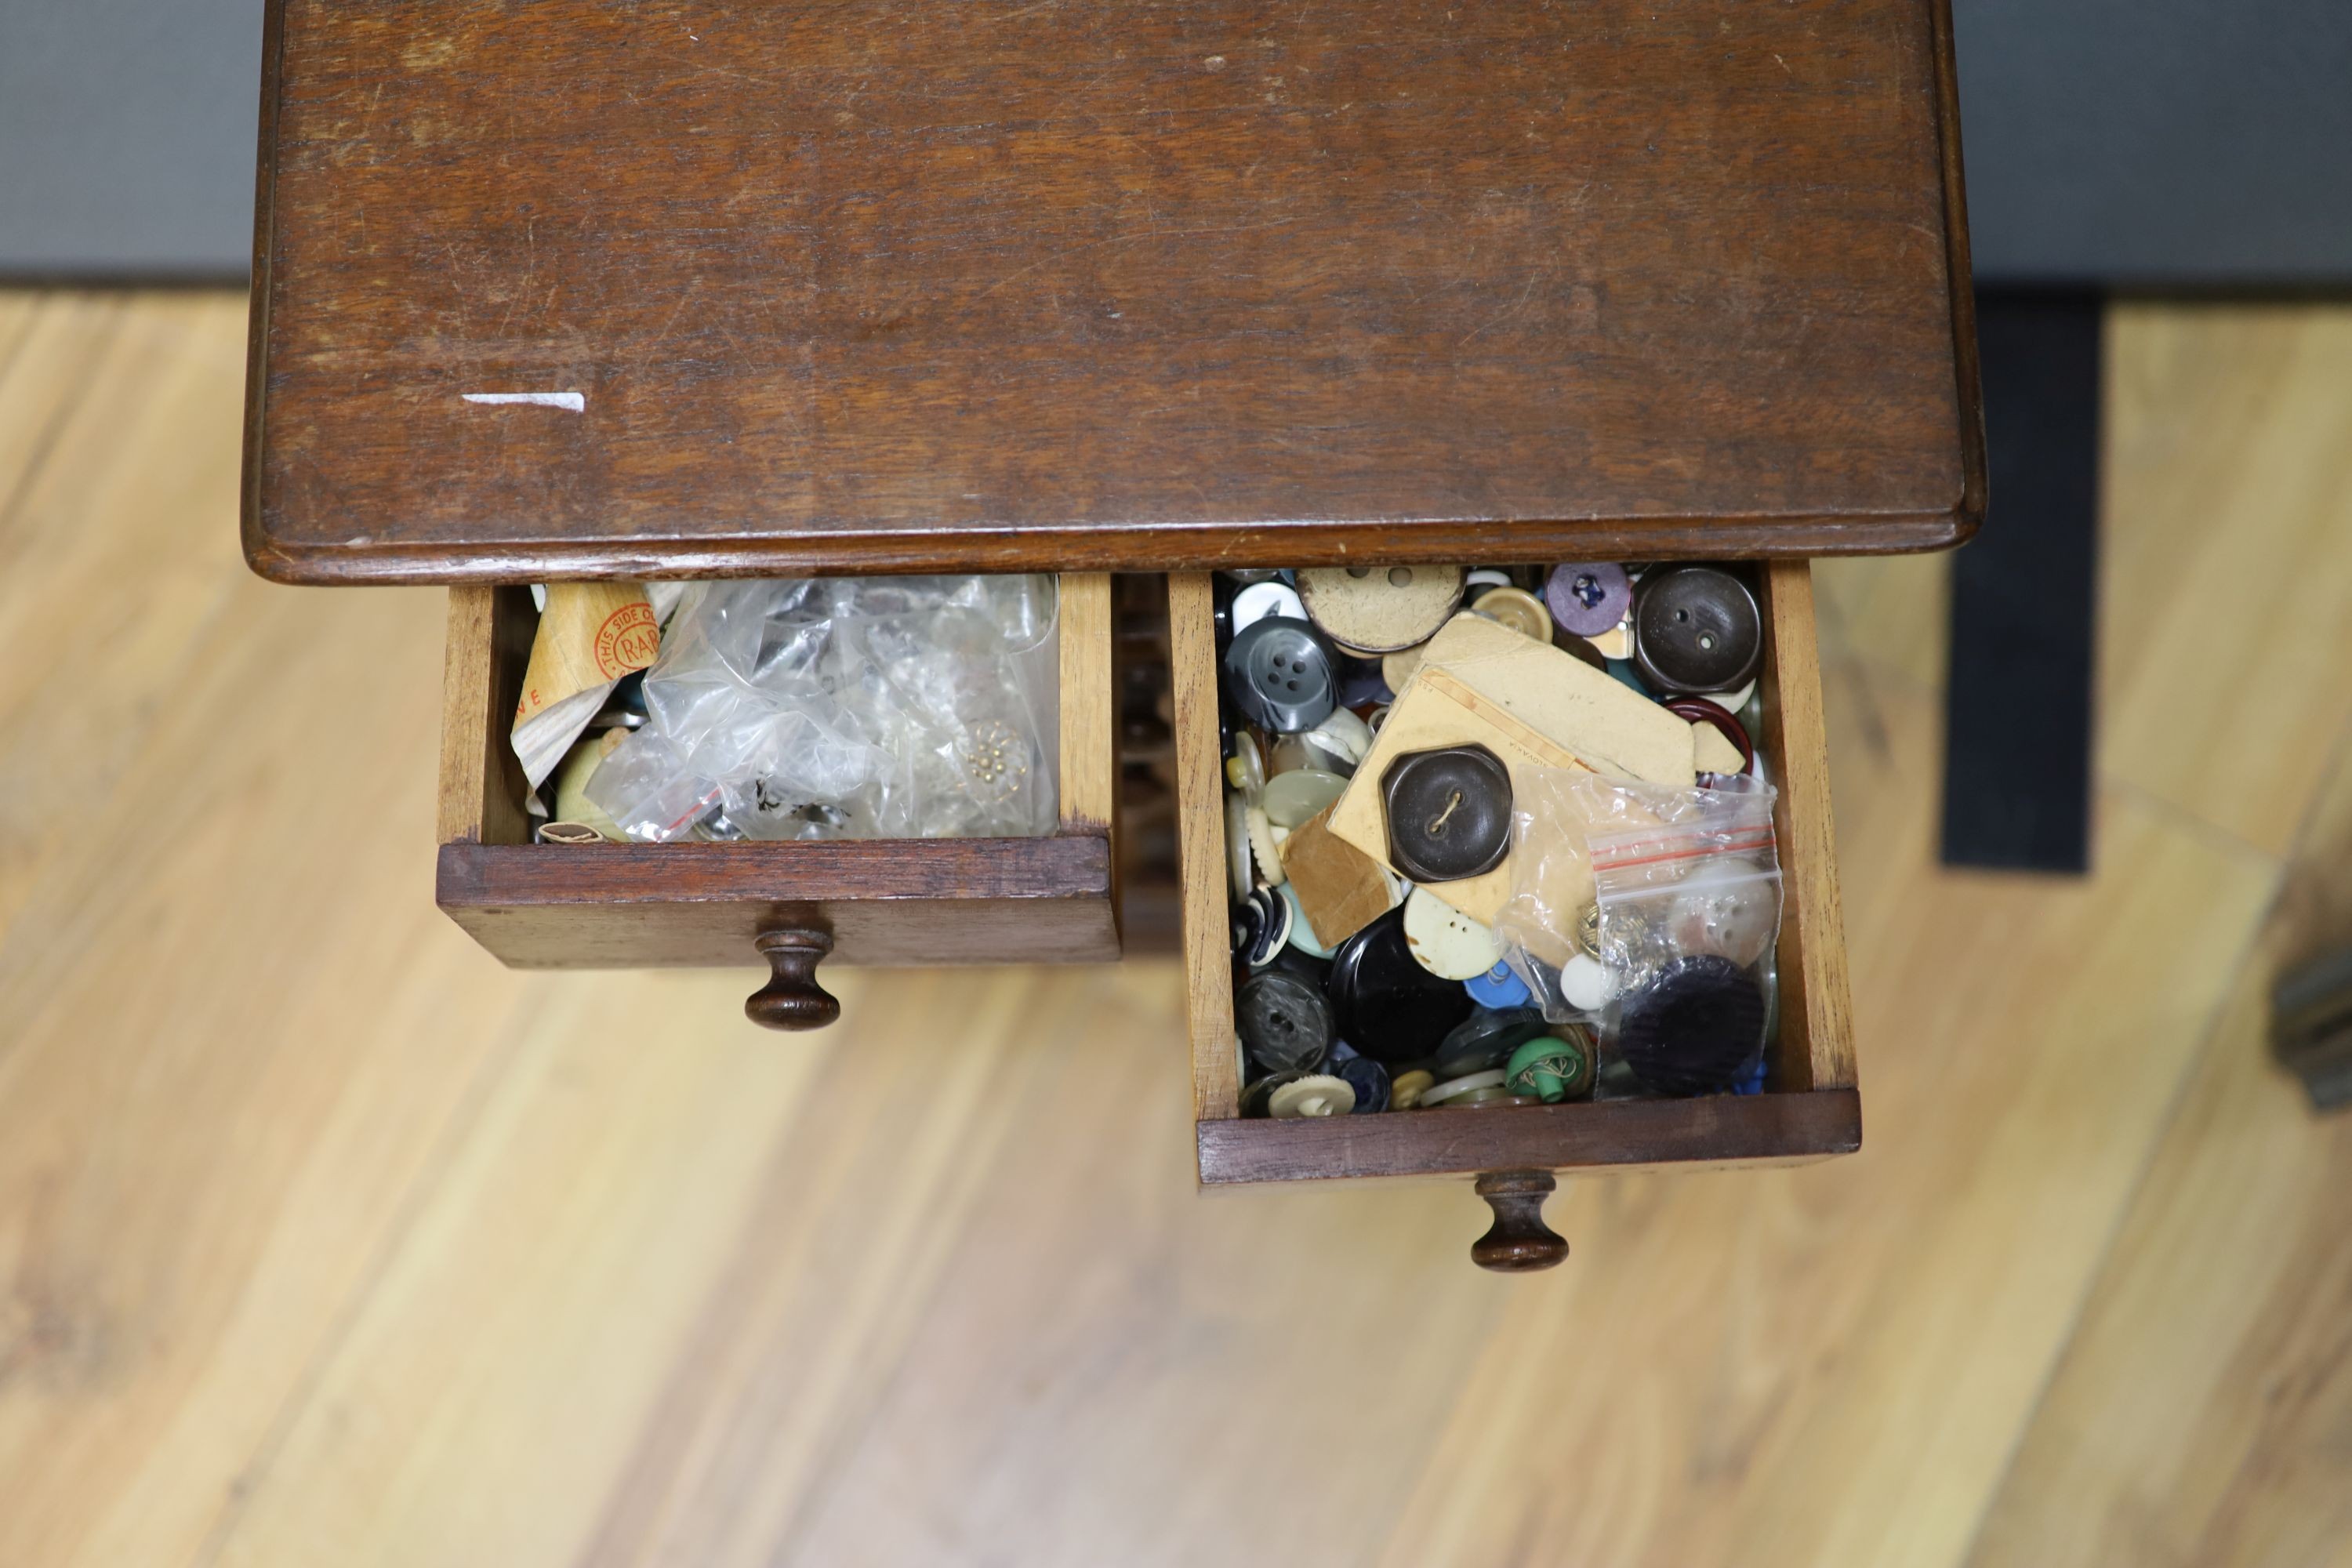 An early 20th century miniature chest and contents